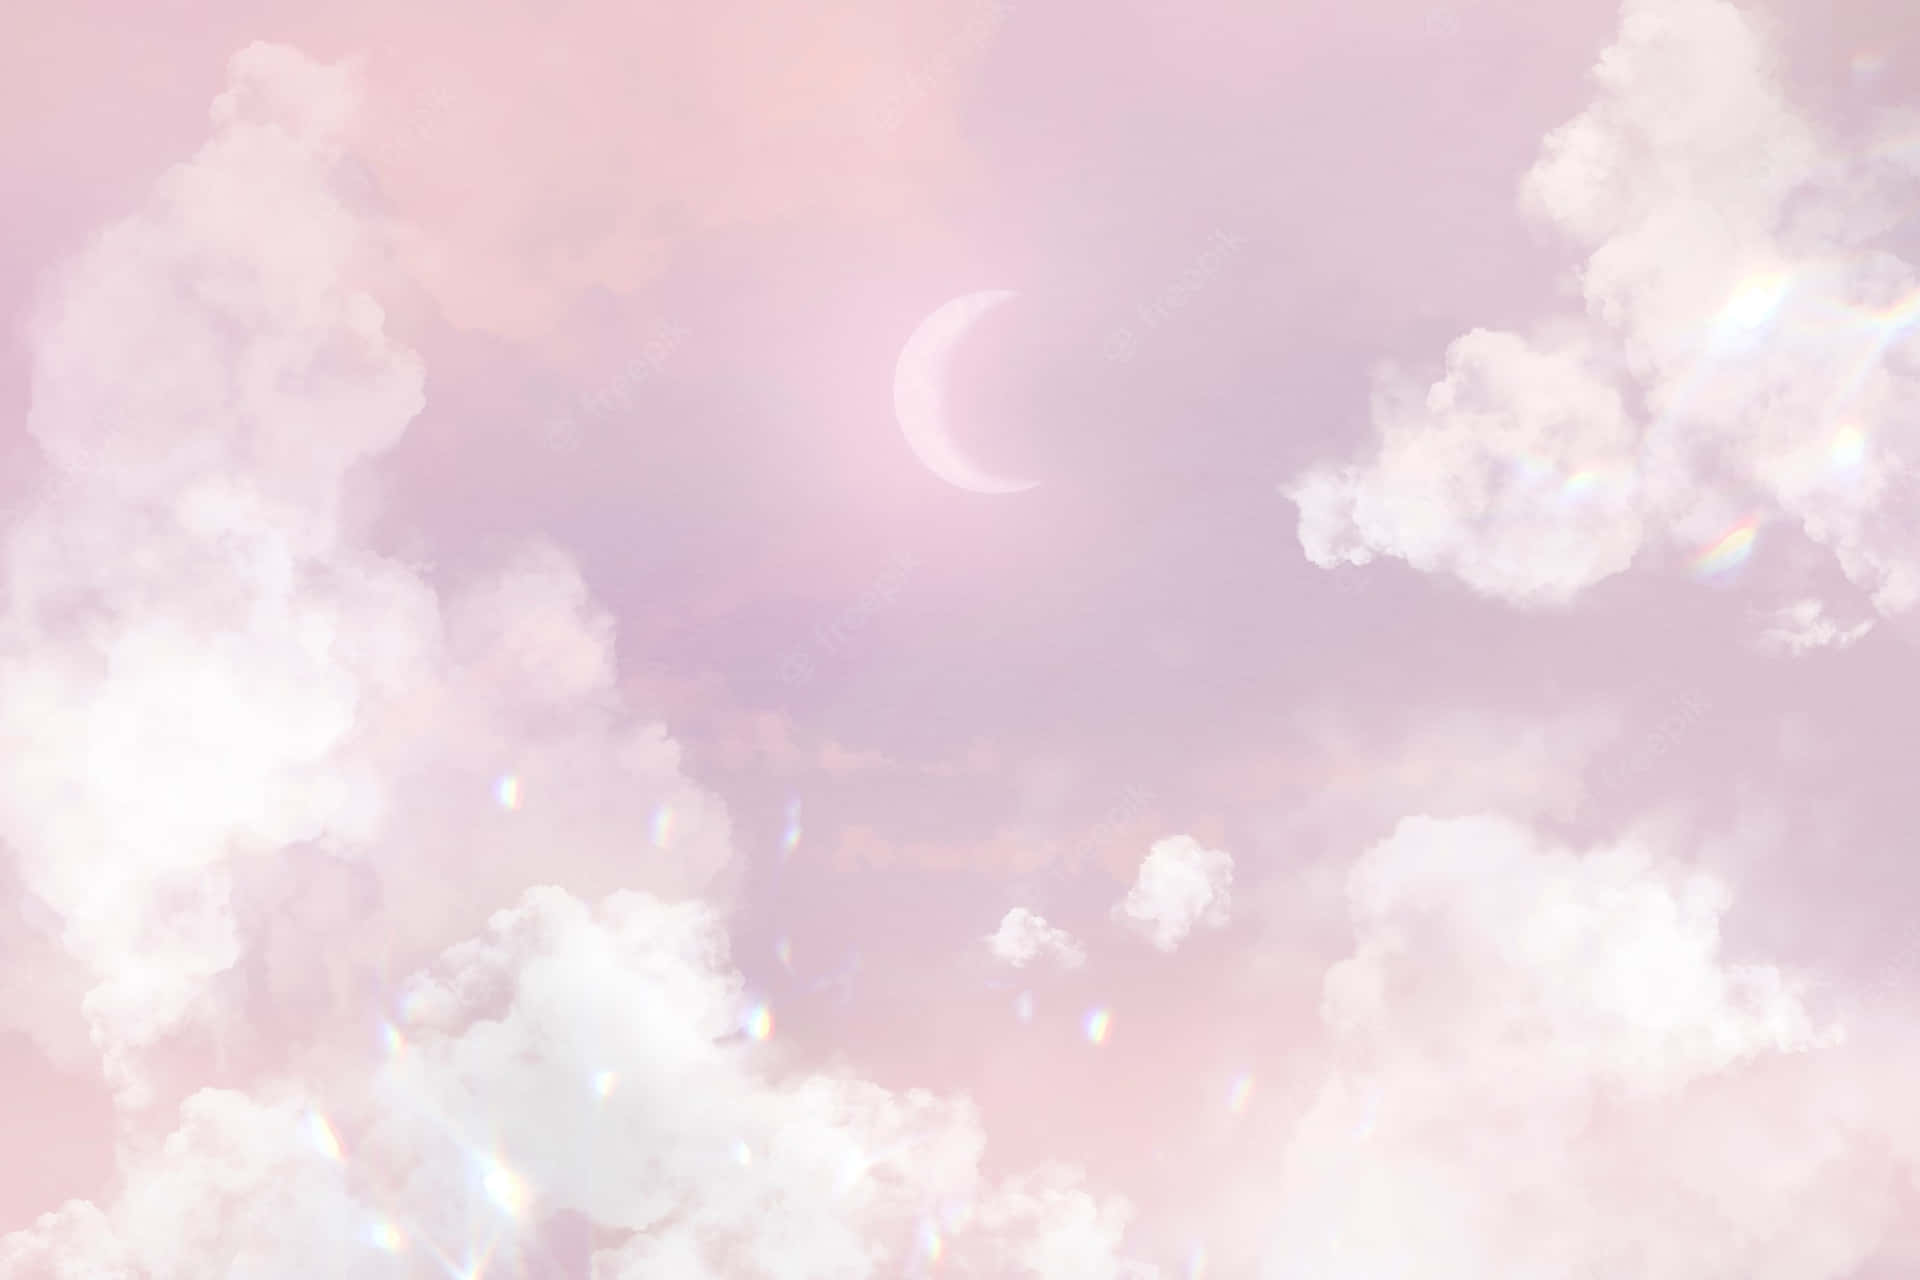 Moon Surrounded By Soft White Aesthetic Clouds Wallpaper